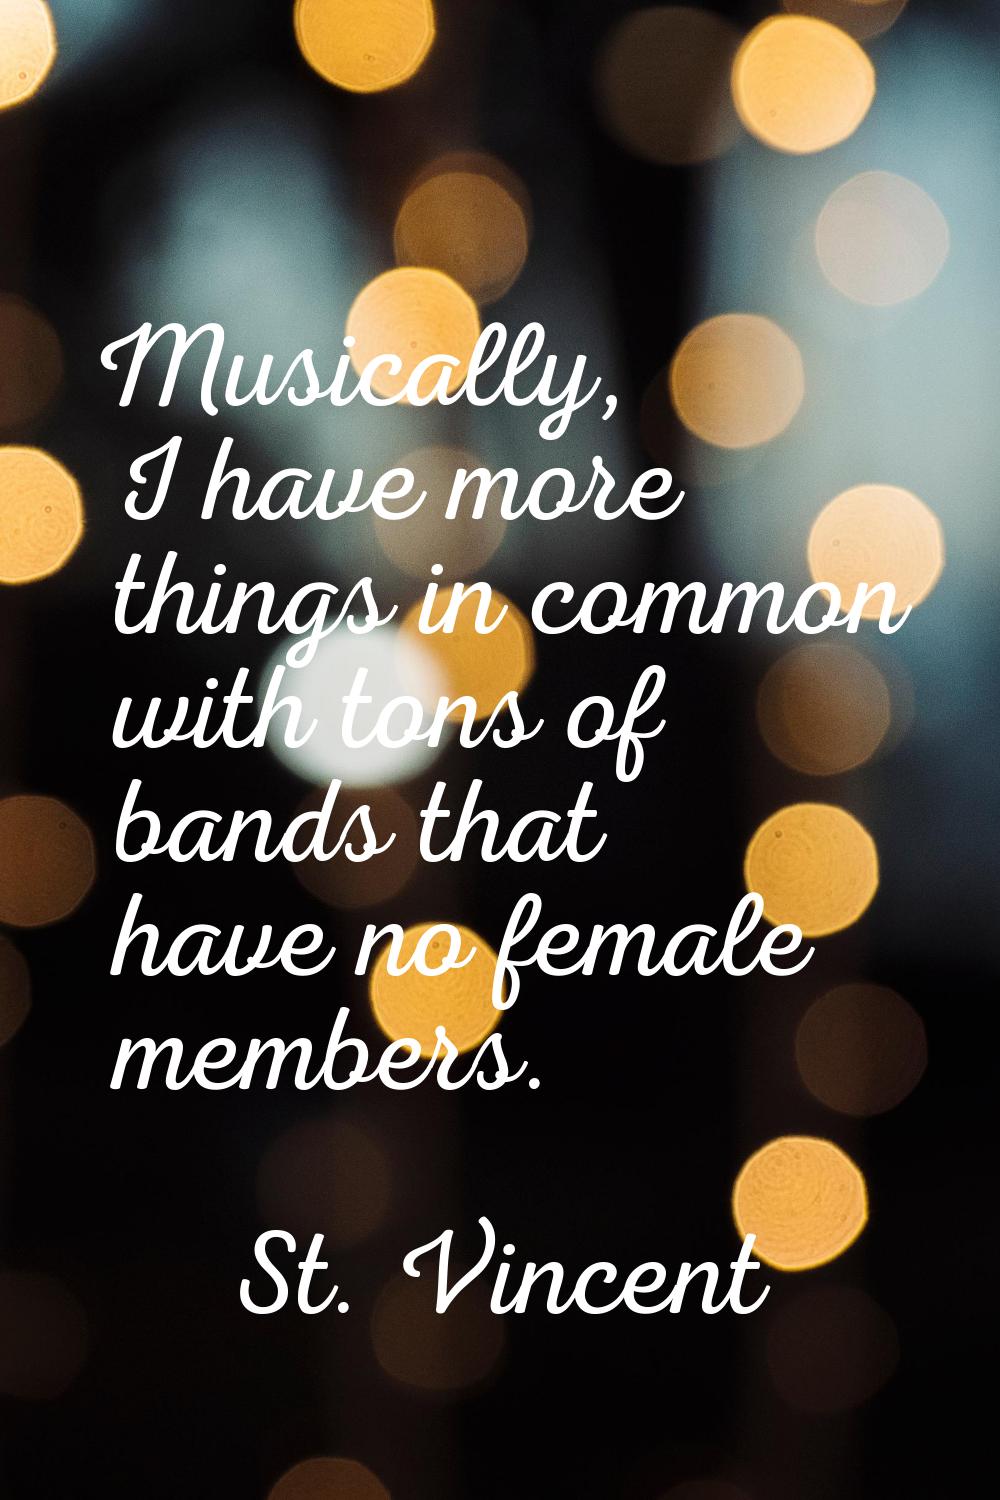 Musically, I have more things in common with tons of bands that have no female members.